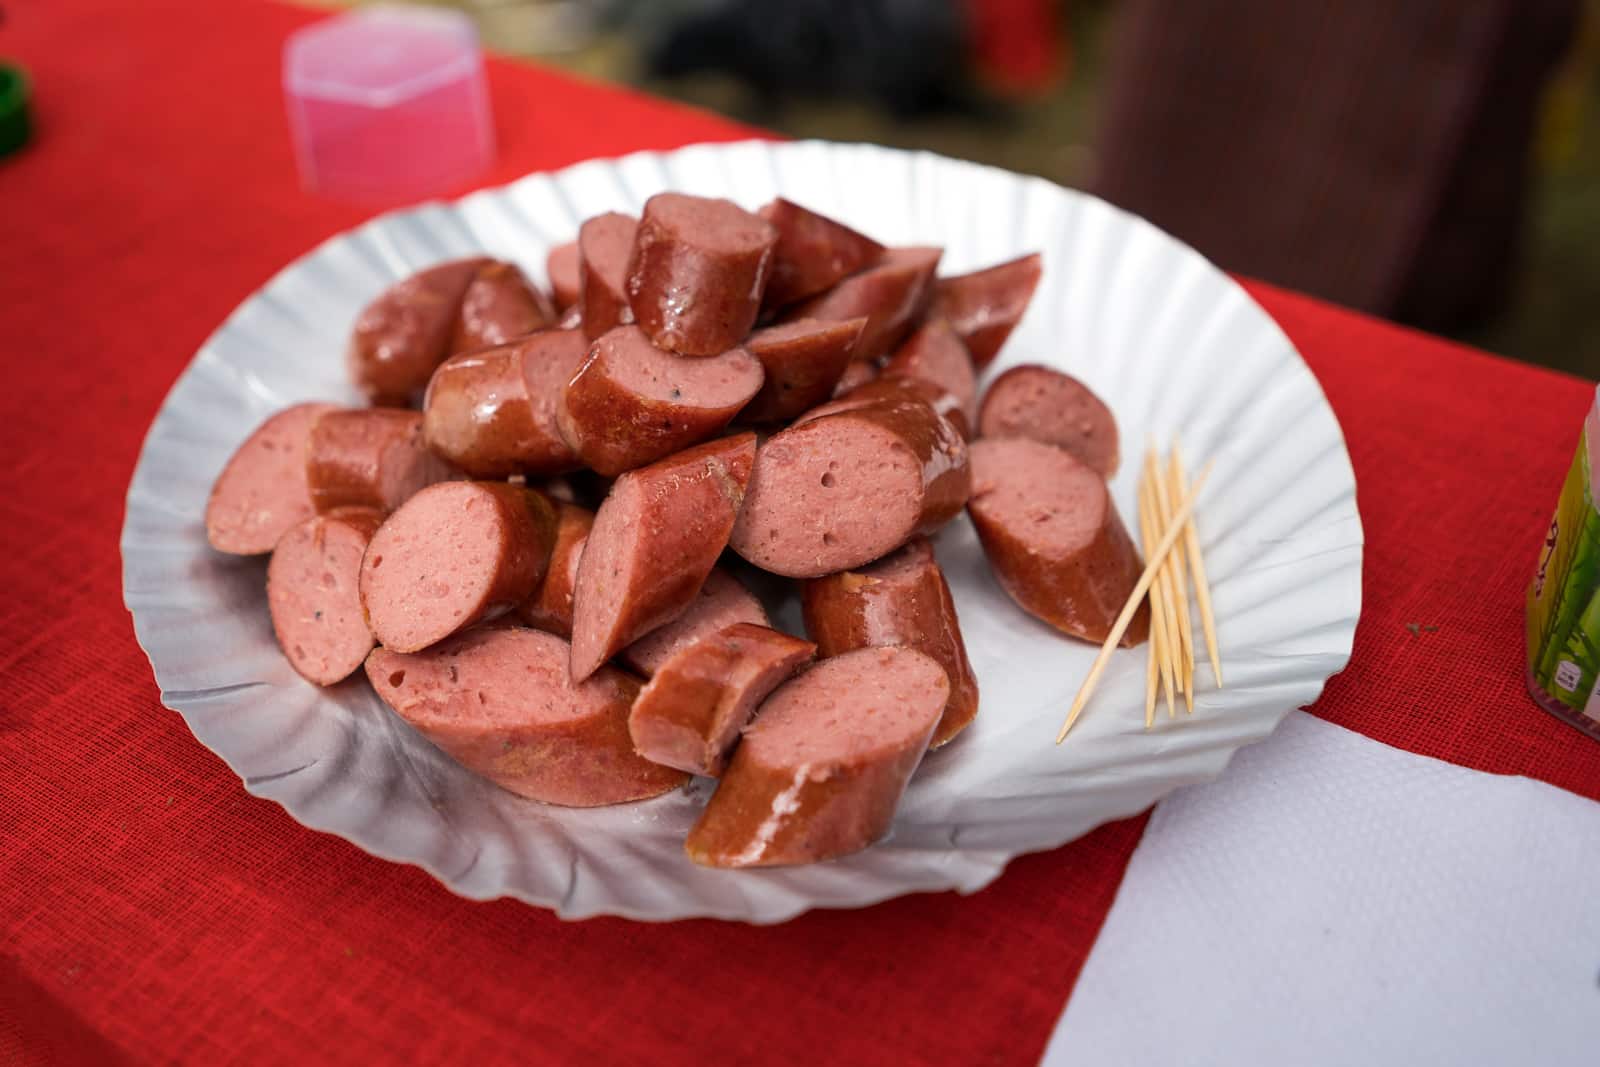 Food at the Royal Highlander Festival in Bhutan - Hot yak sausage slices - Lost With Purpose travel blog